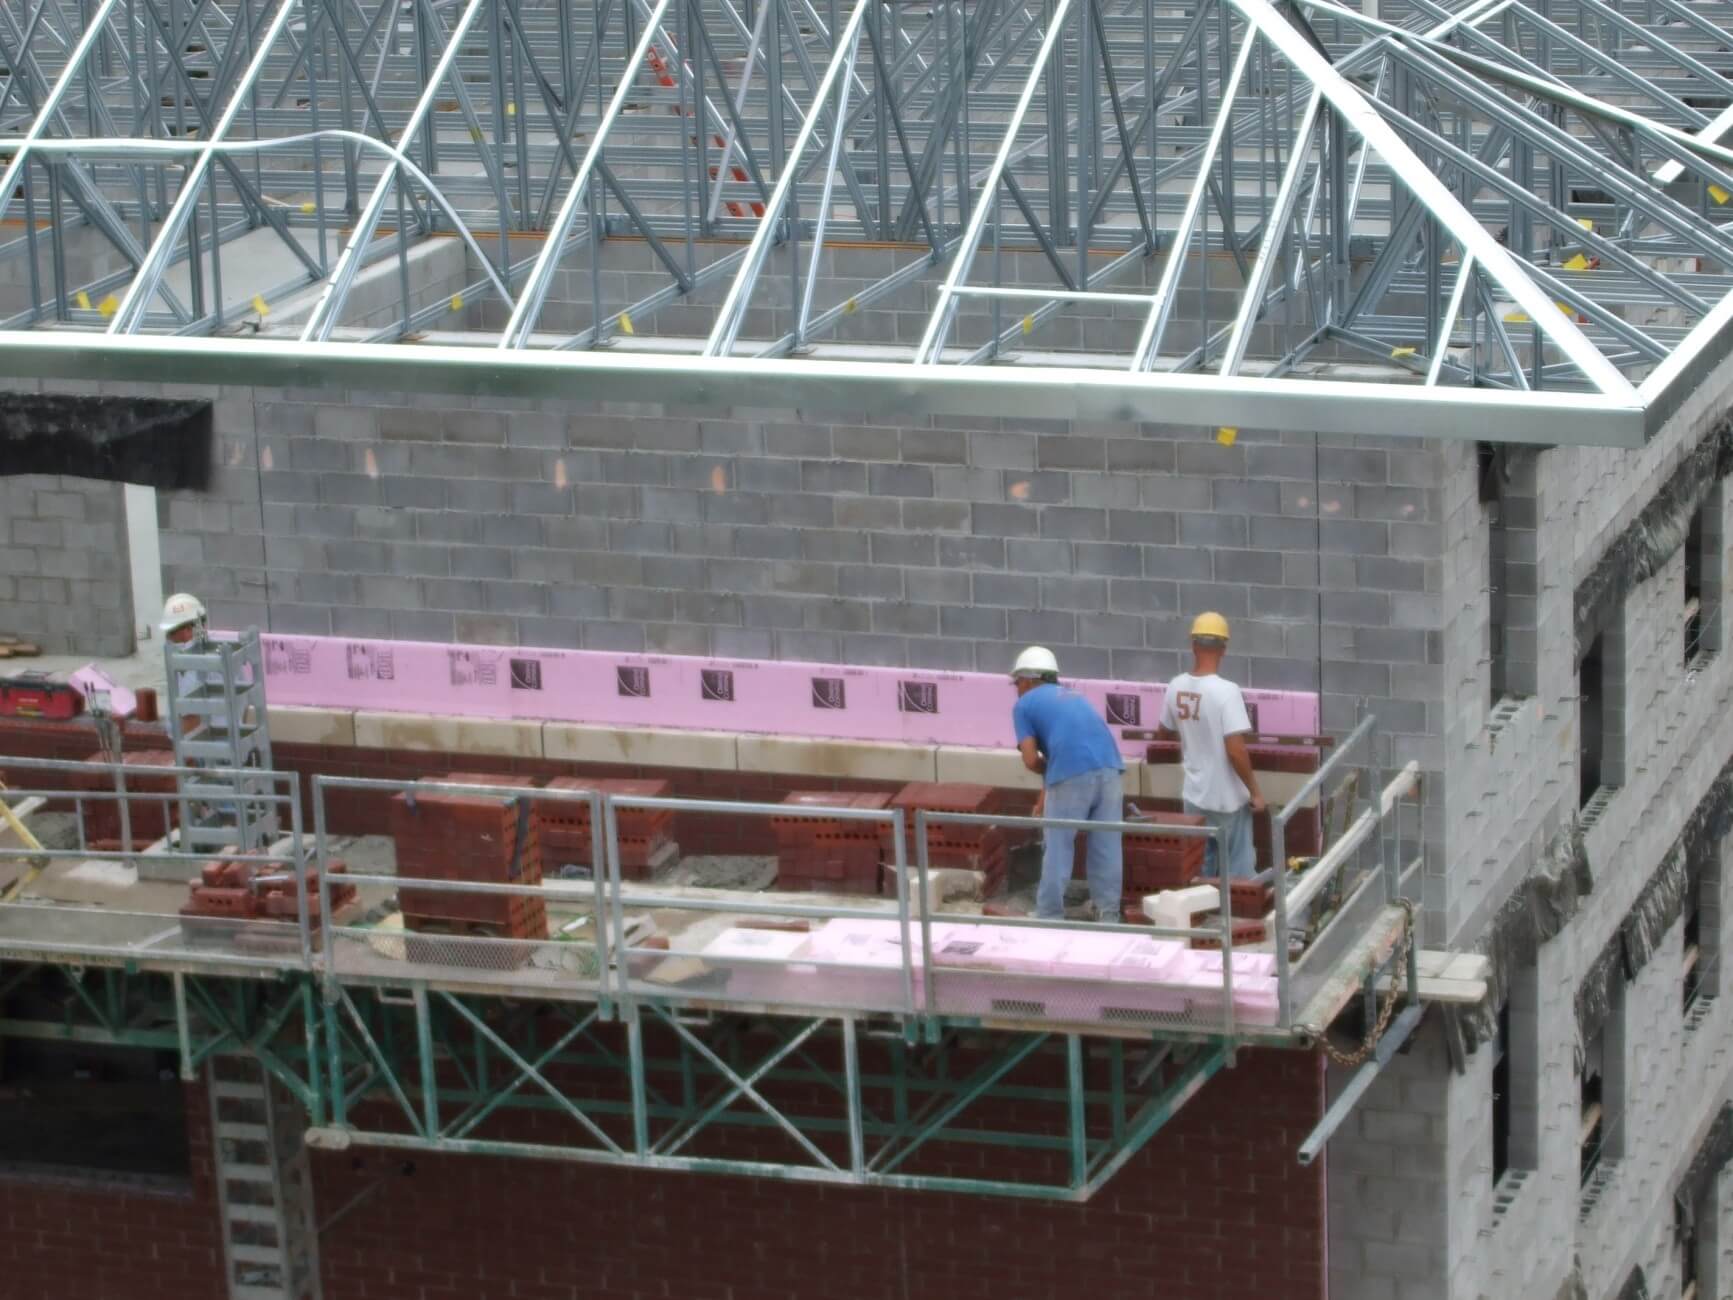 Exterior wall of commercial building with construction workers above concrete masonry